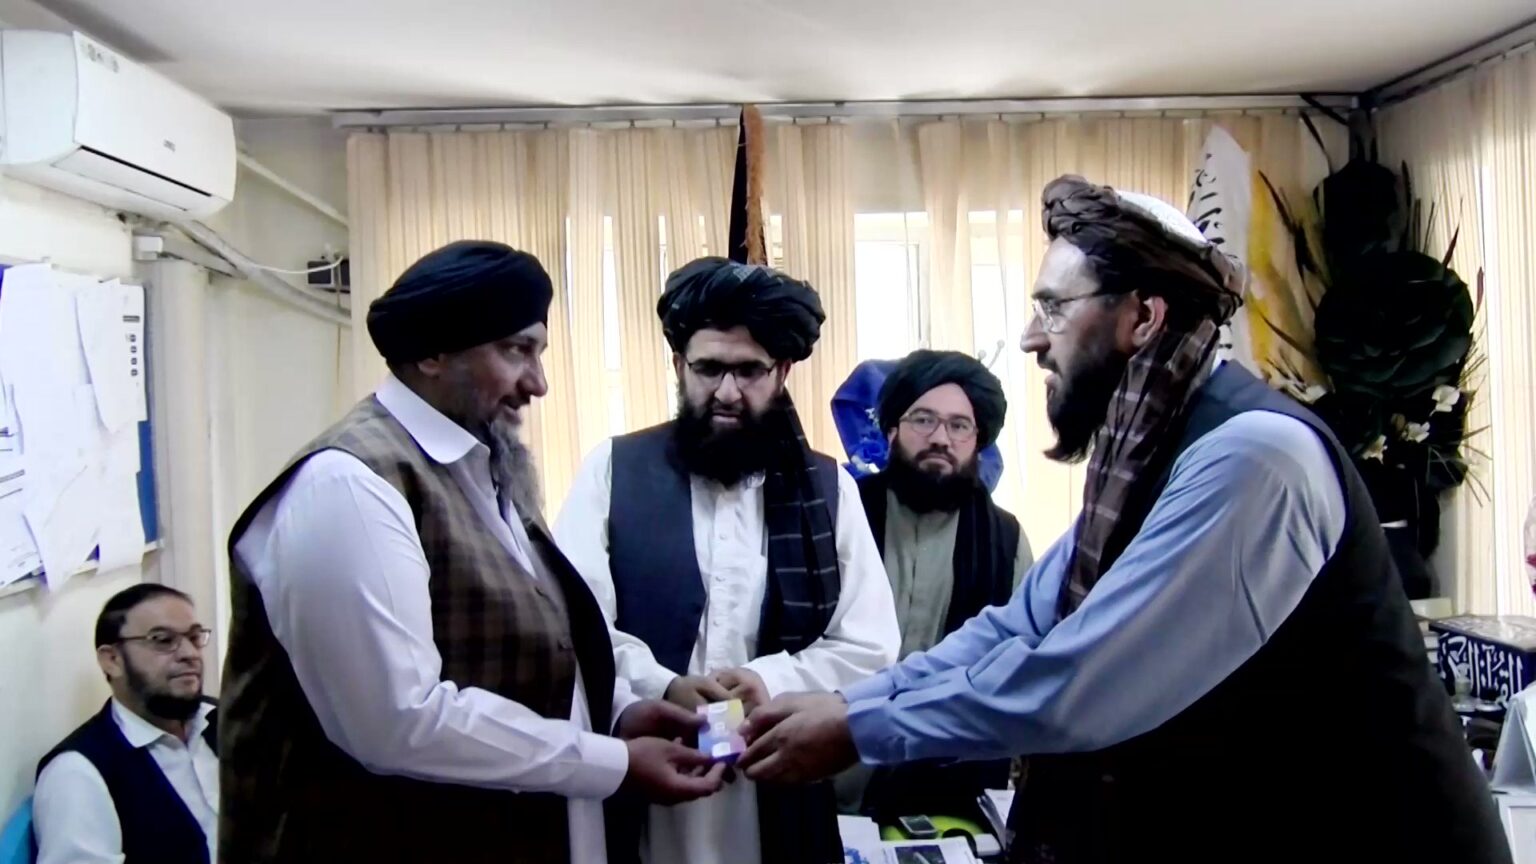 Taliban Appoints Hindu-Sikh Representative in Kabul to Advance Their Rights